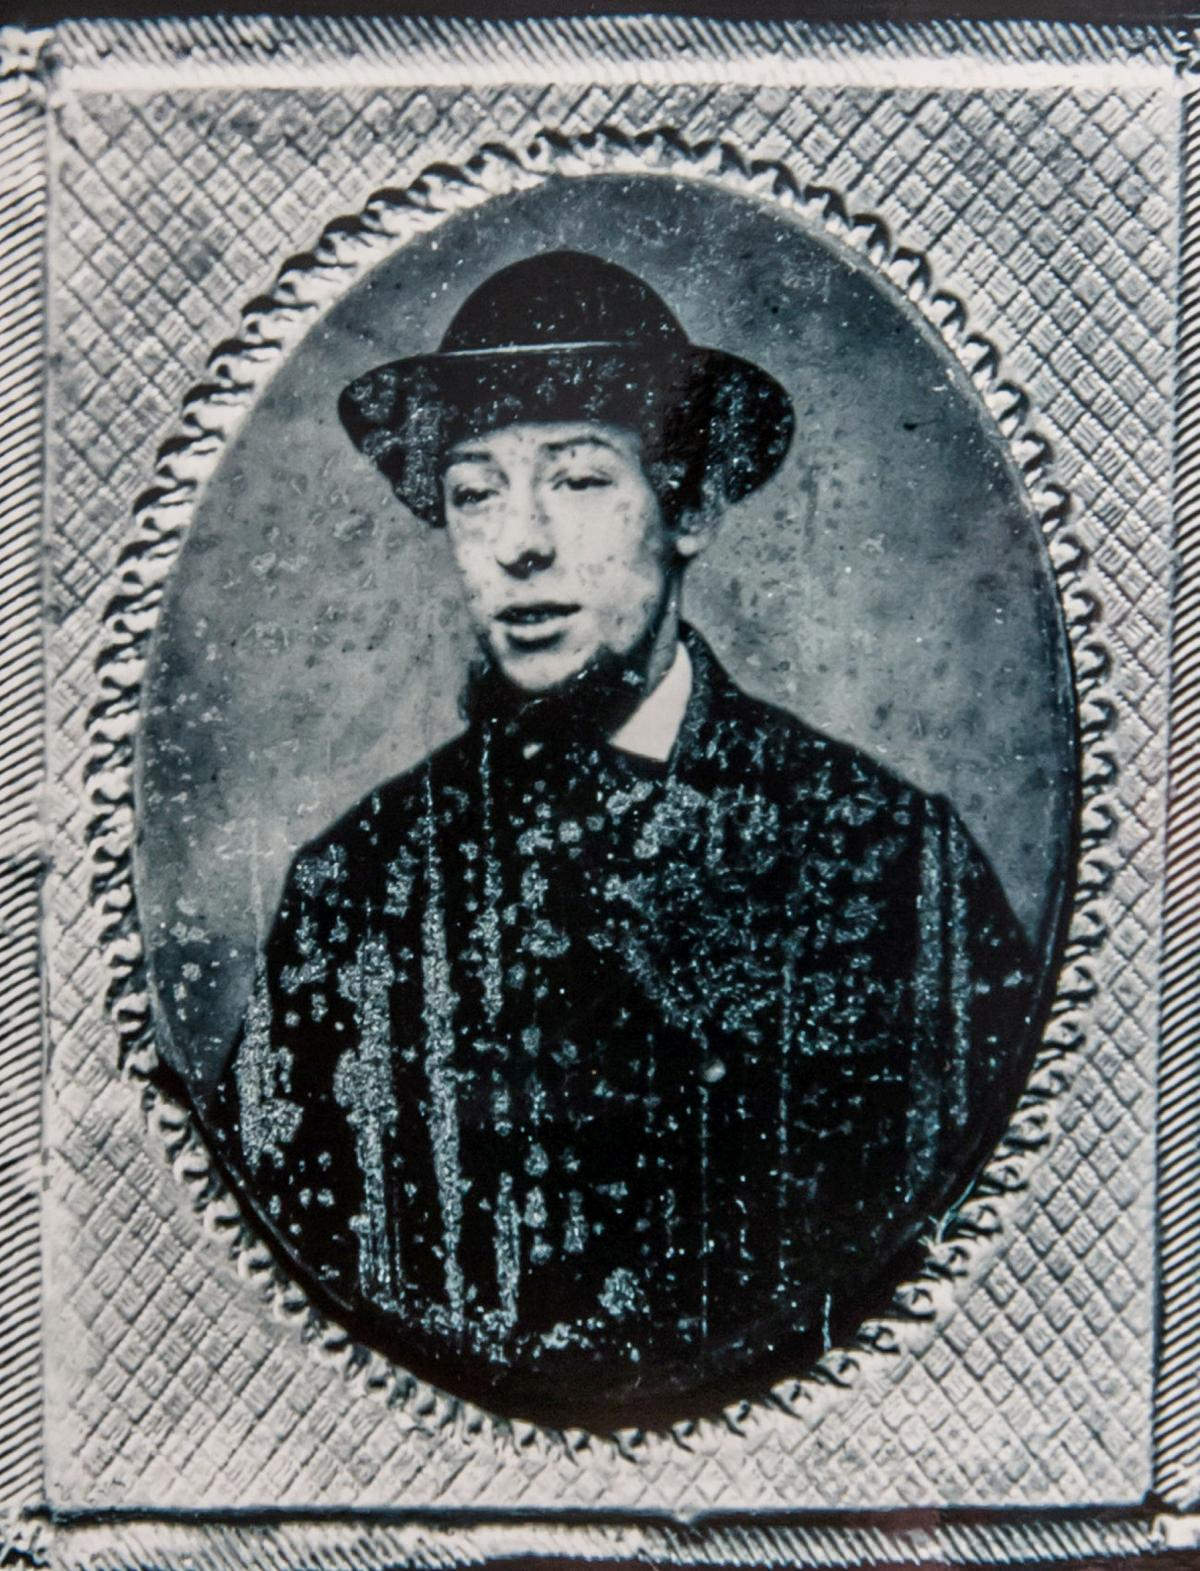 A mugshot of an unknown man from between 1850-70.